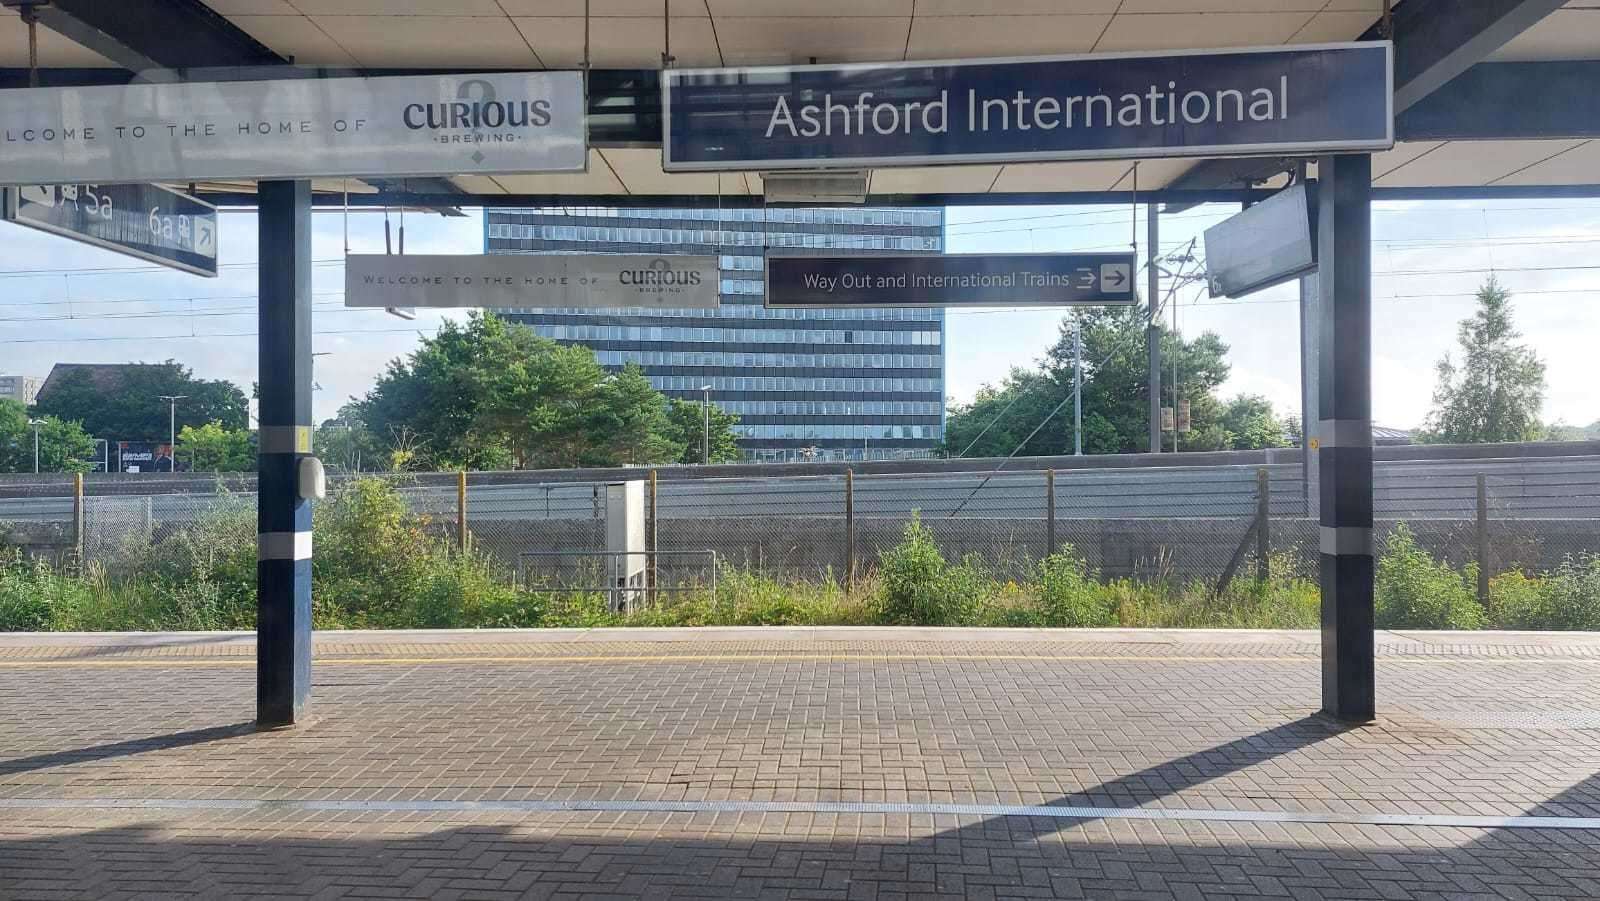 Ashford International on Tuesday, June 21, 2022, on the first day of a national strike